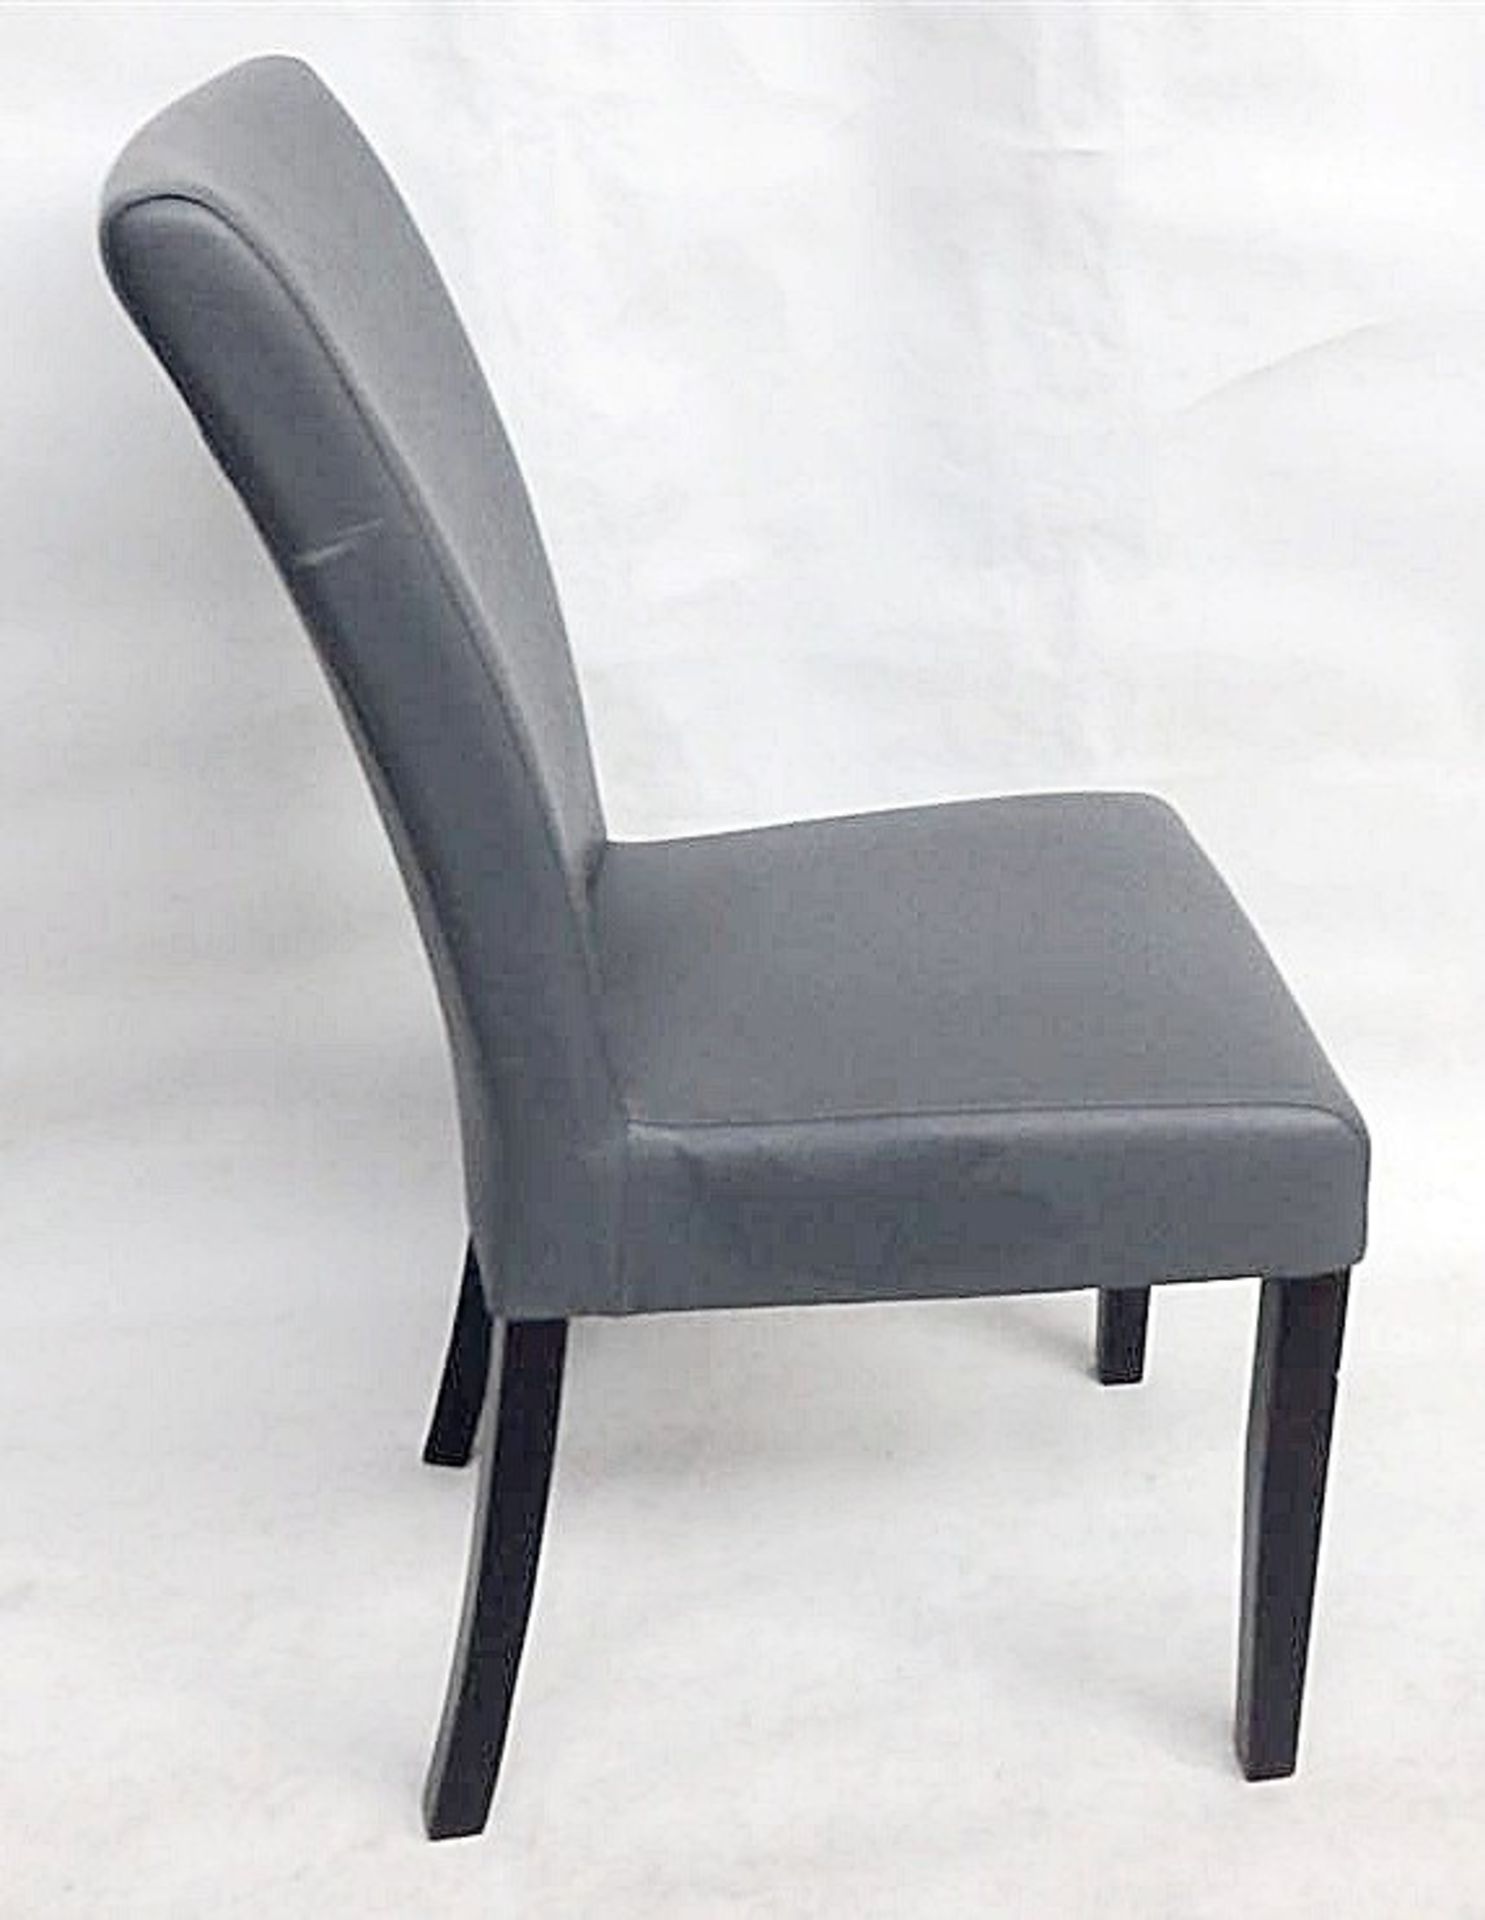 1 x Soft Grey Leather Chair - Handcrafted & Upholstered By British Craftsmen - Dimensions: W44 x D47 - Image 8 of 12